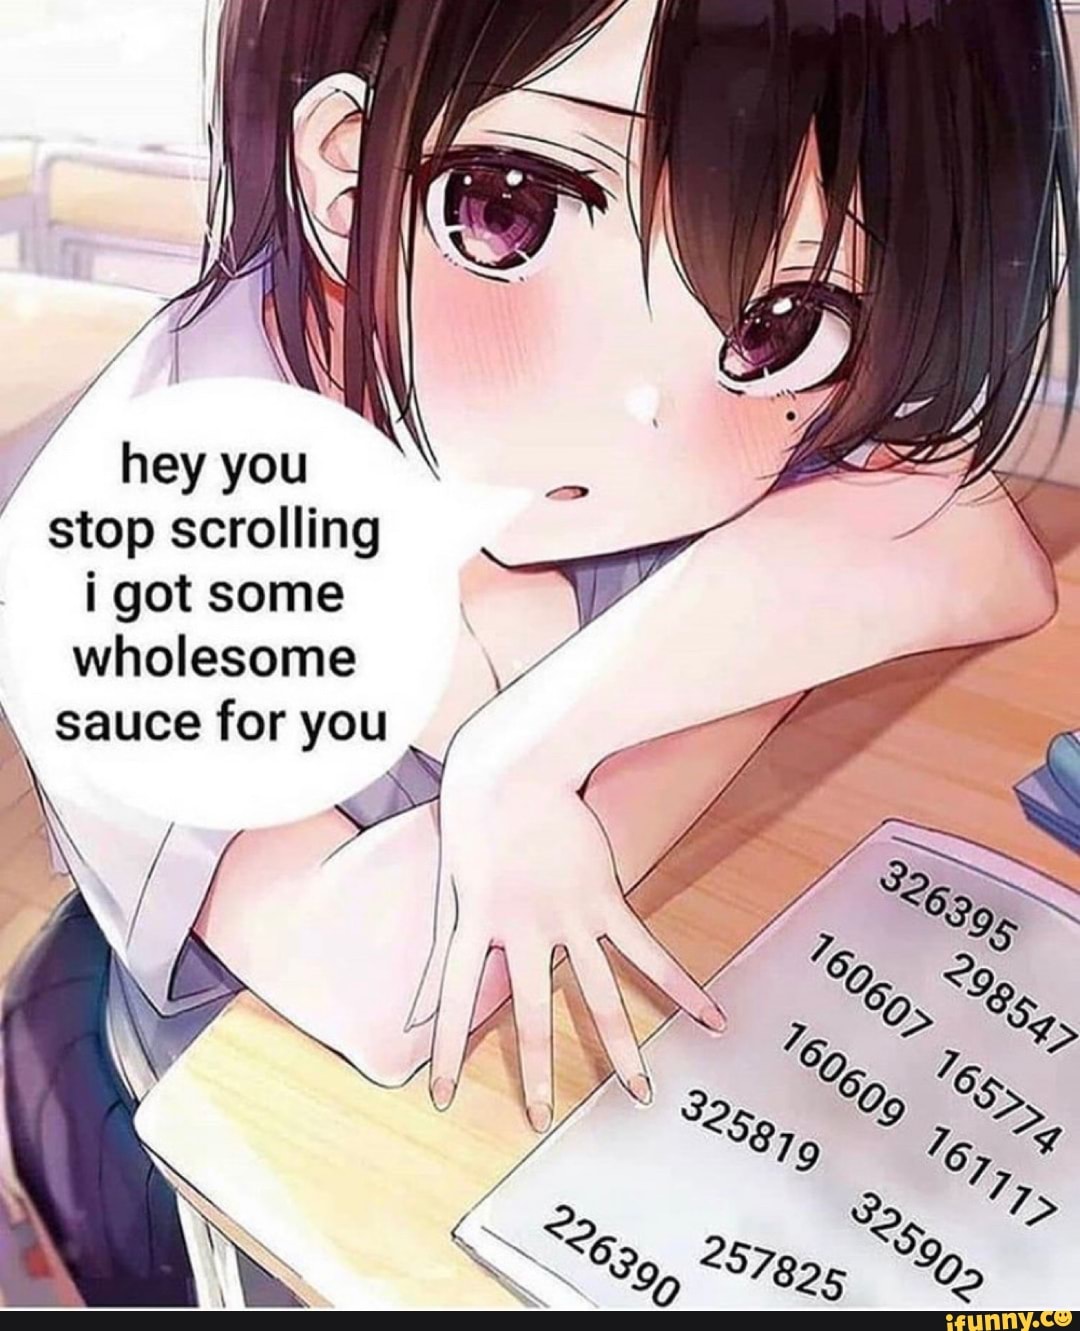 Hey you stop scrolling got some wholesome Sauce for you - iFunny